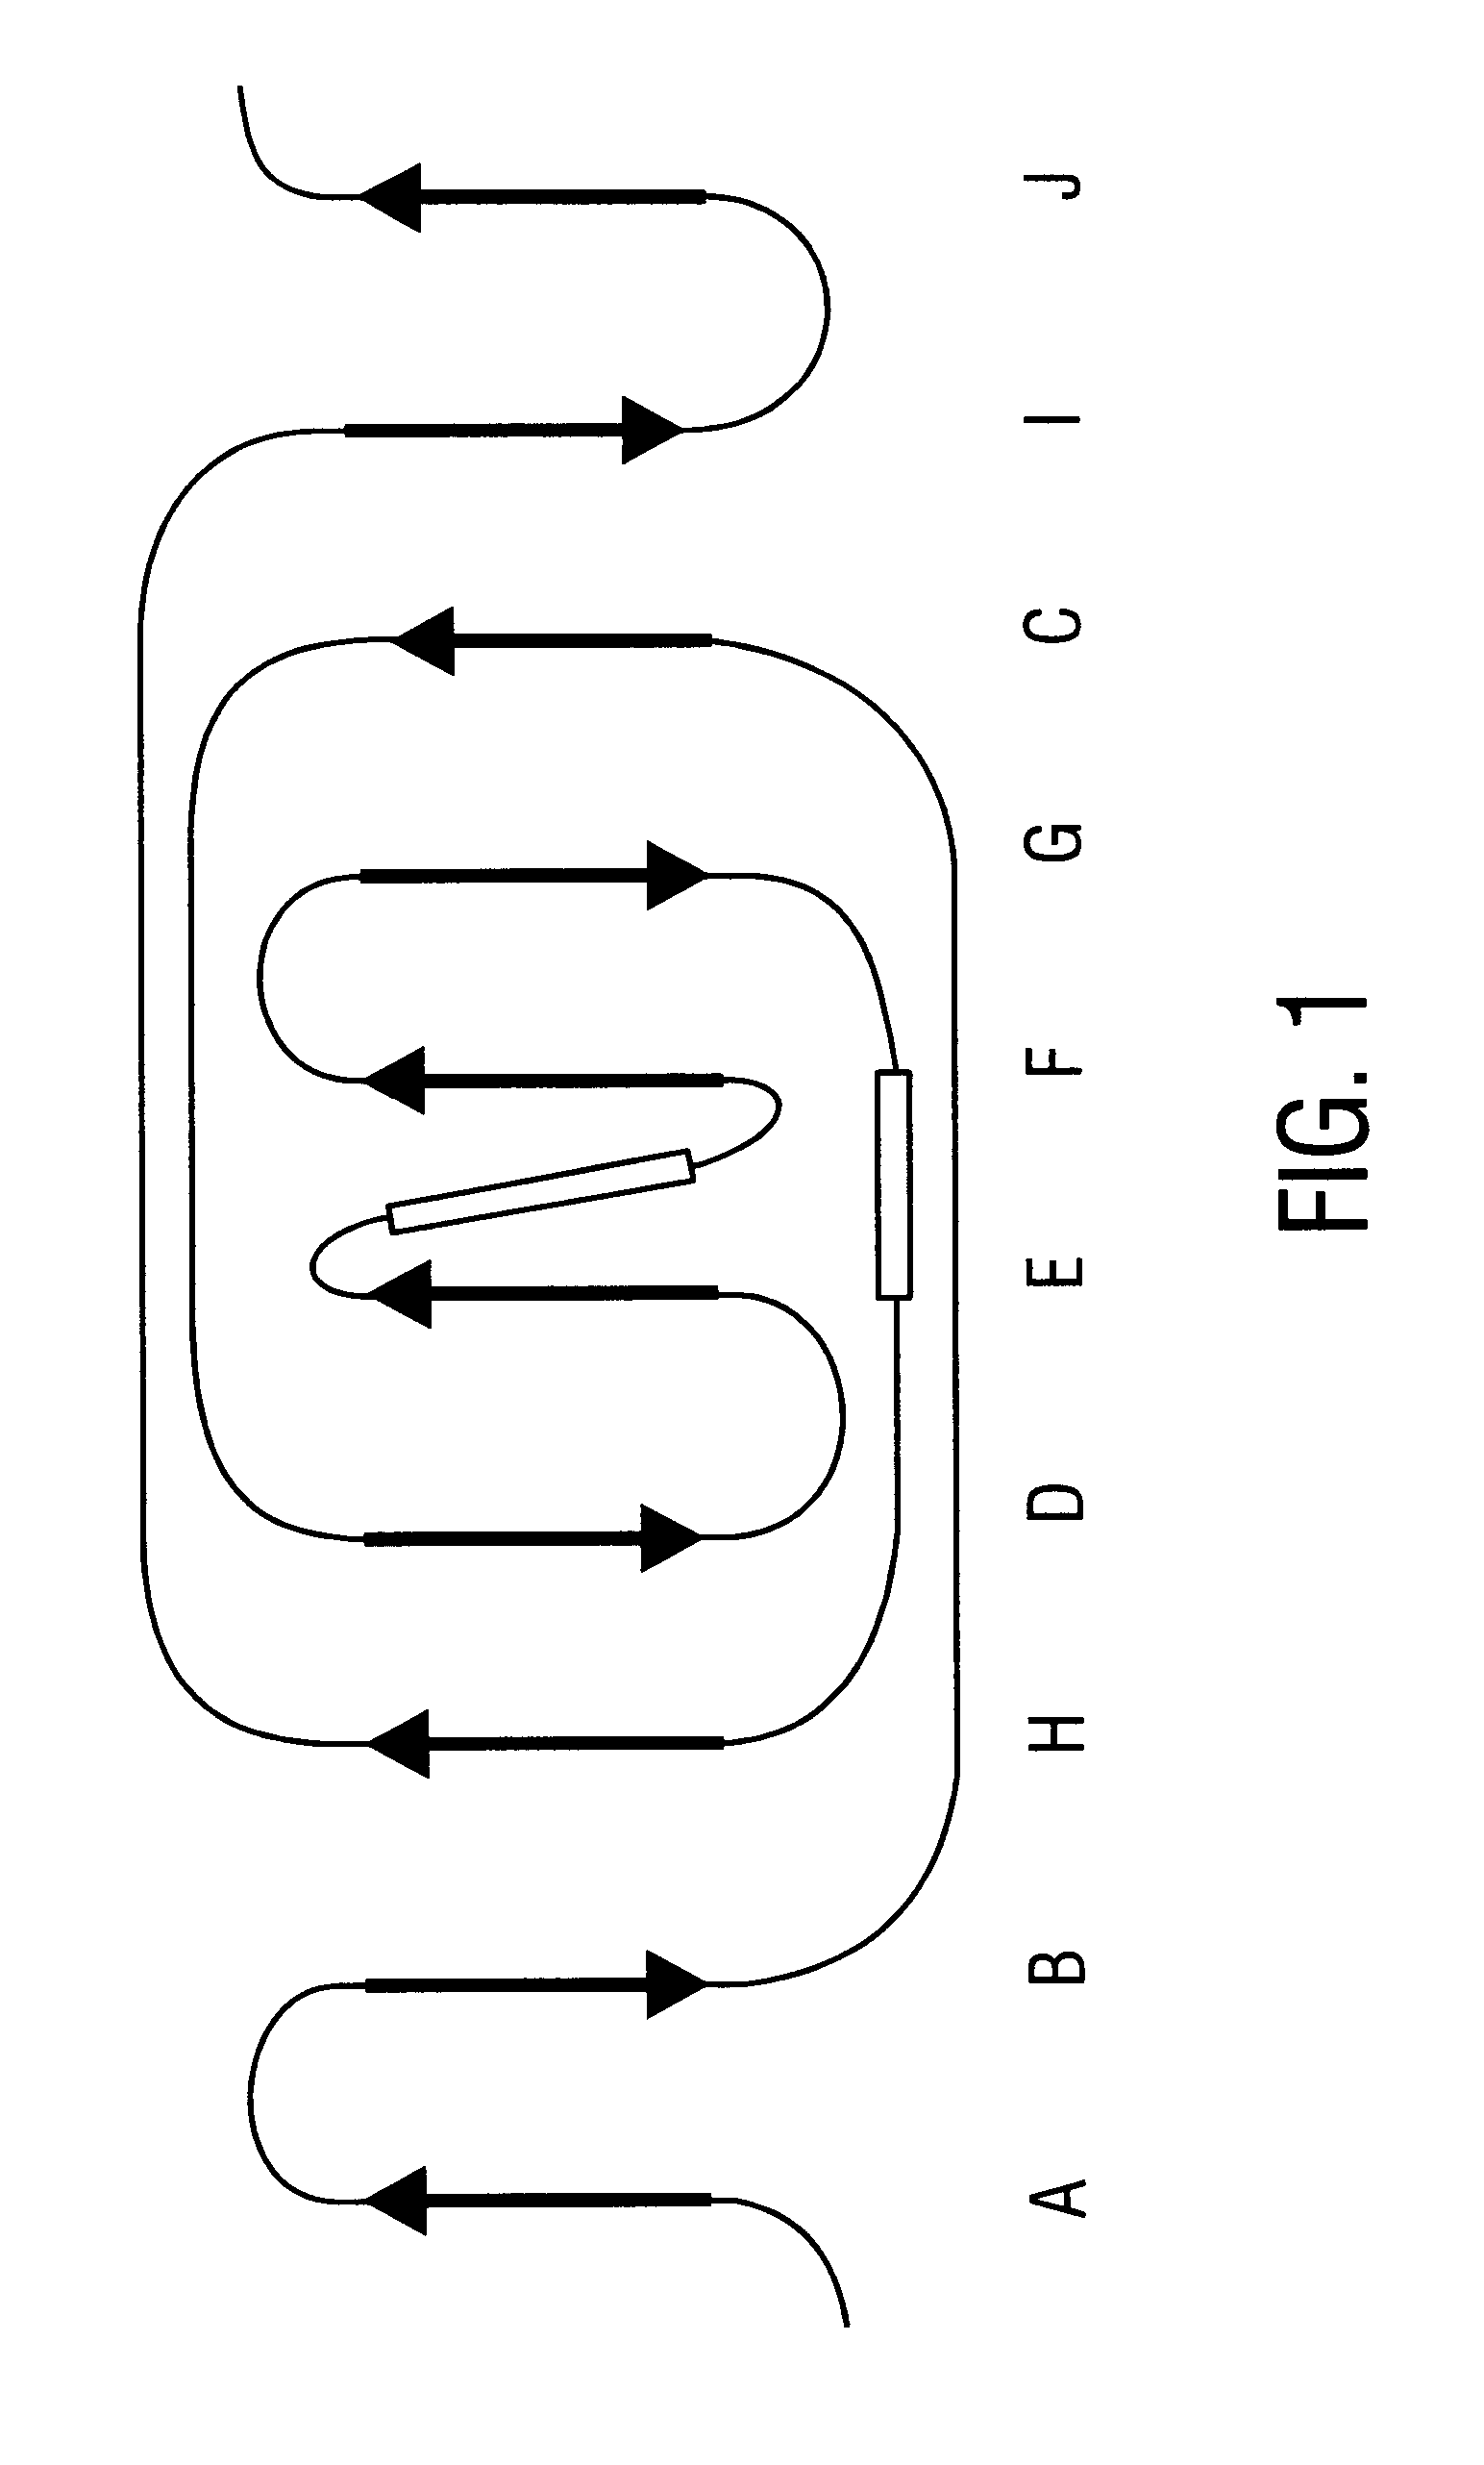 Collagen binding protein compositions and methods of use